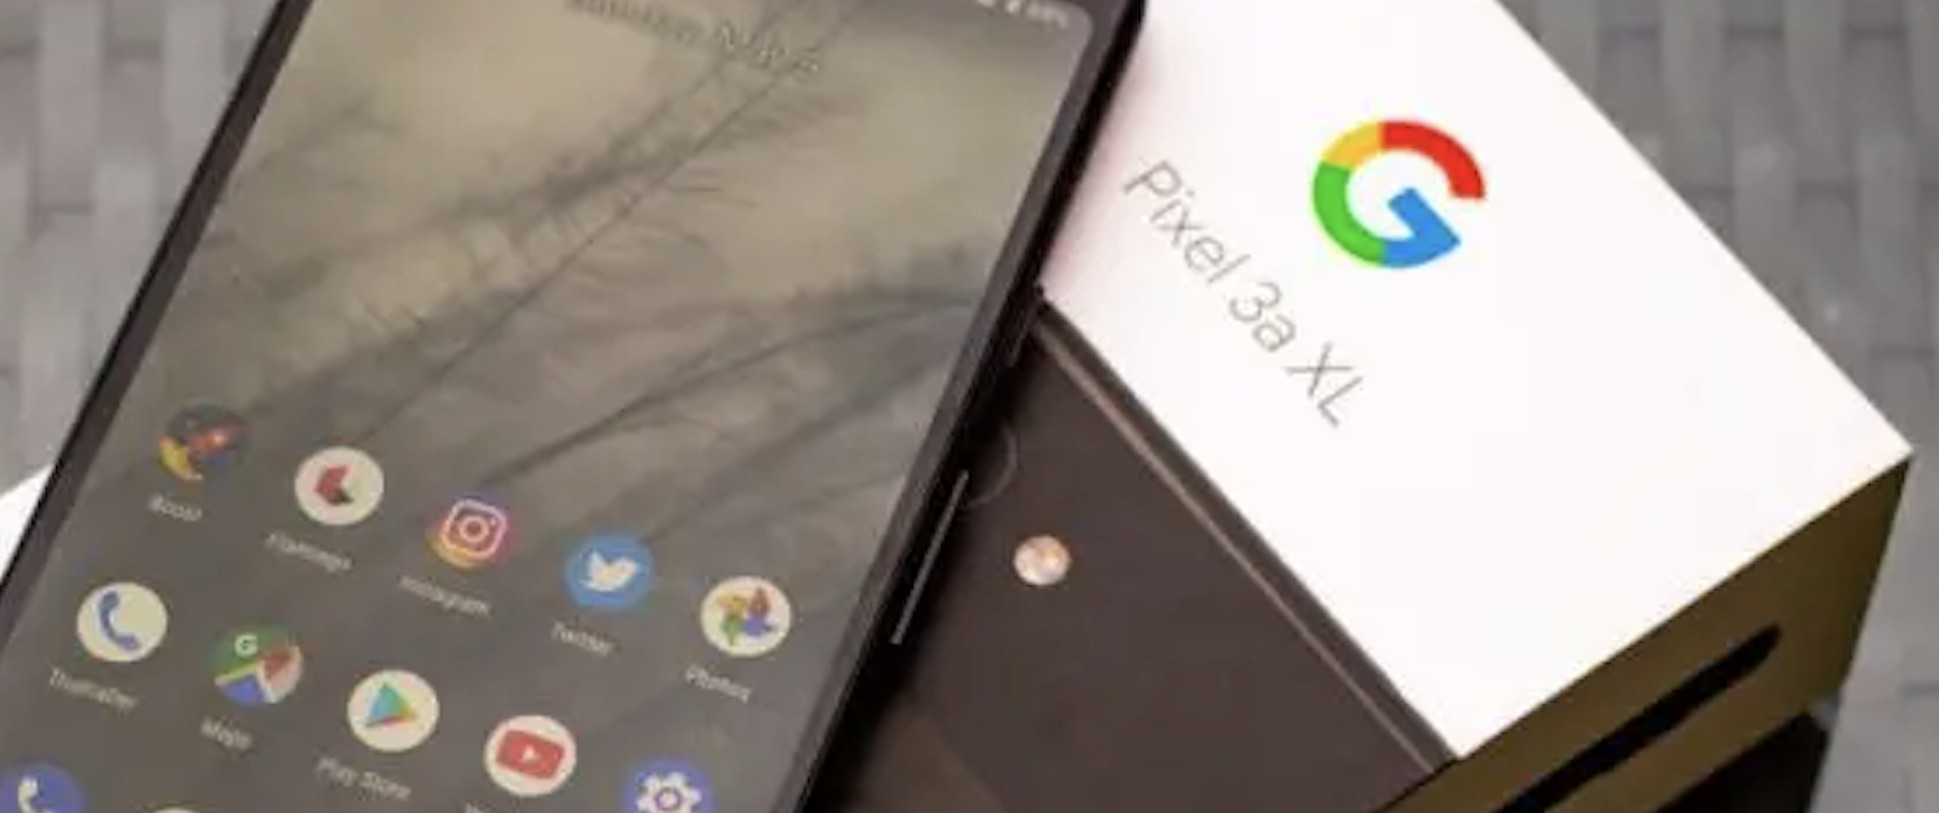 Manuals and Instructions for Google Pixel and Pixel XL users